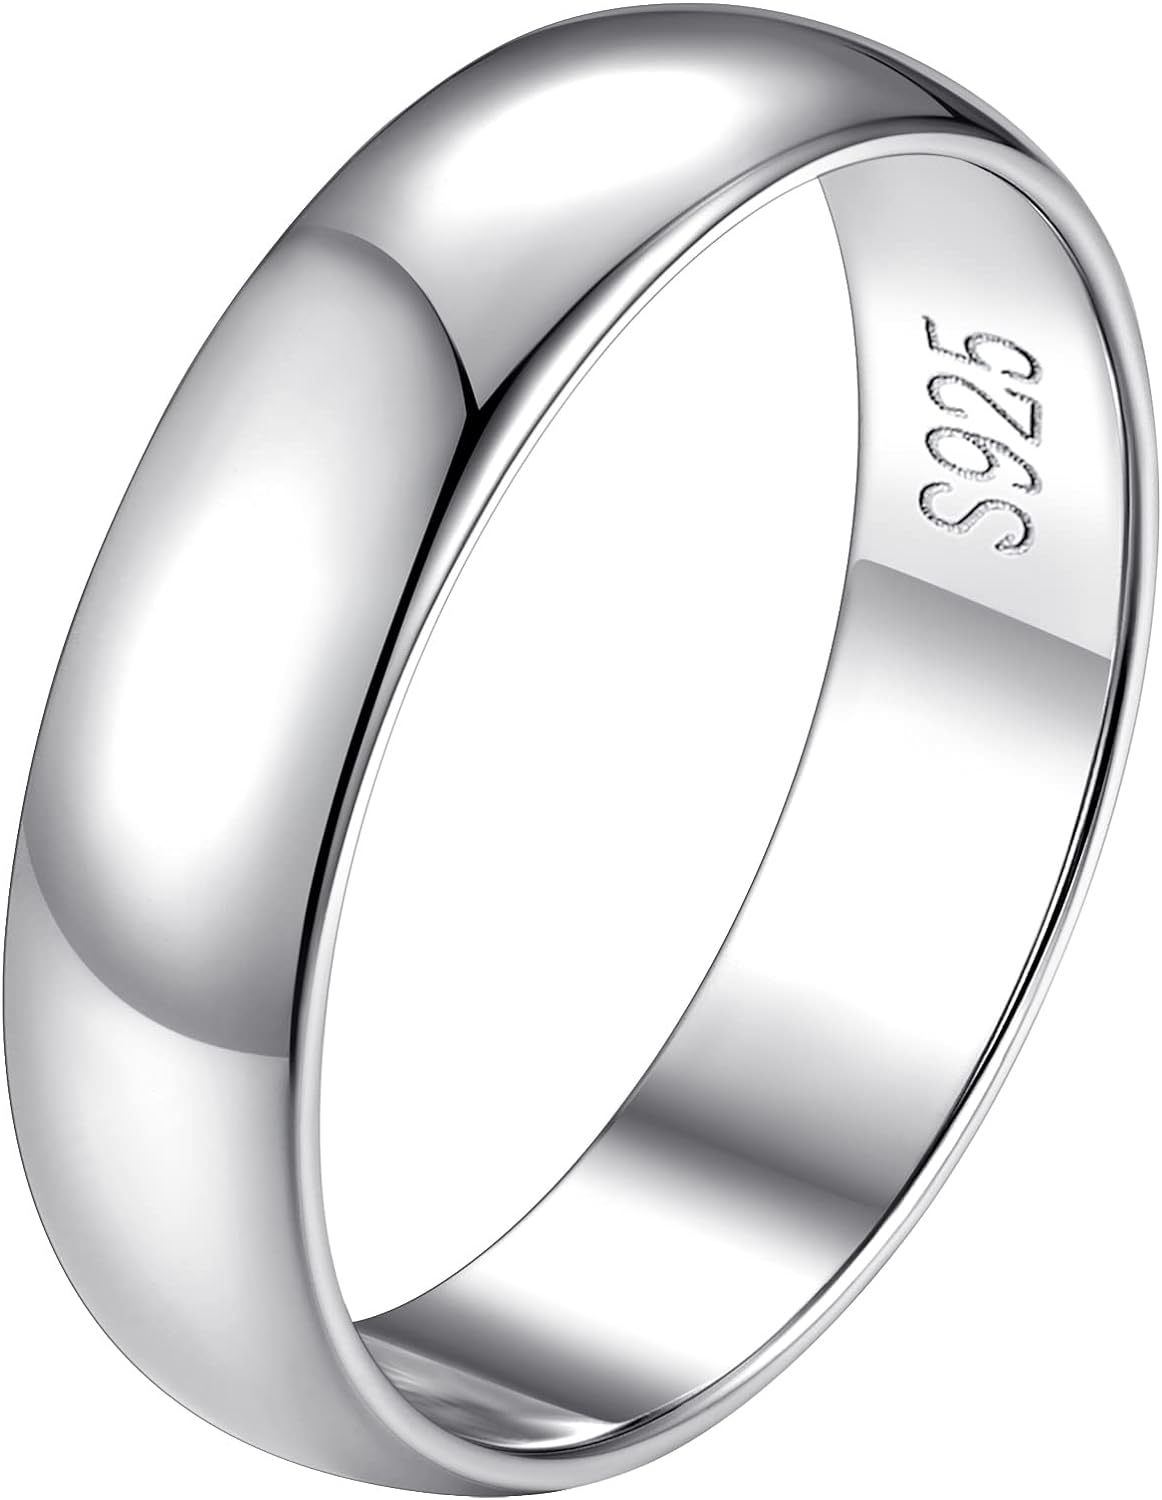 FindChic 925 Sterling Silver Band Rings for Women Girls Simple Engagement Wedding Band